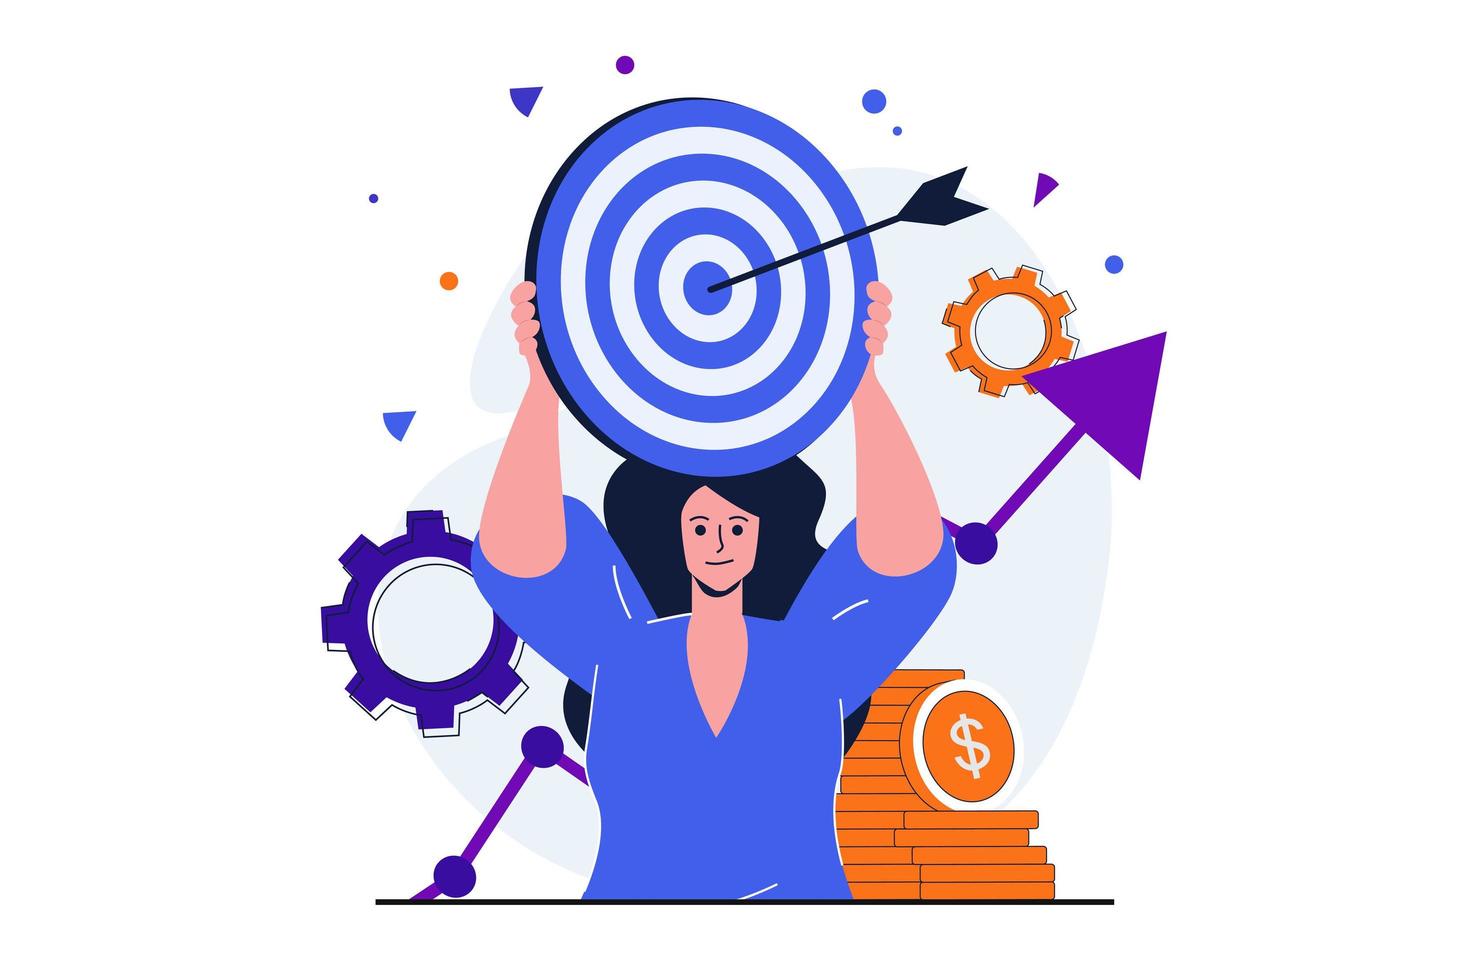 Business target modern flat concept for web banner design. Businesswoman holds dartboard with arrow. Financial success, goals achievement and leadership. Vector illustration with isolated people scene